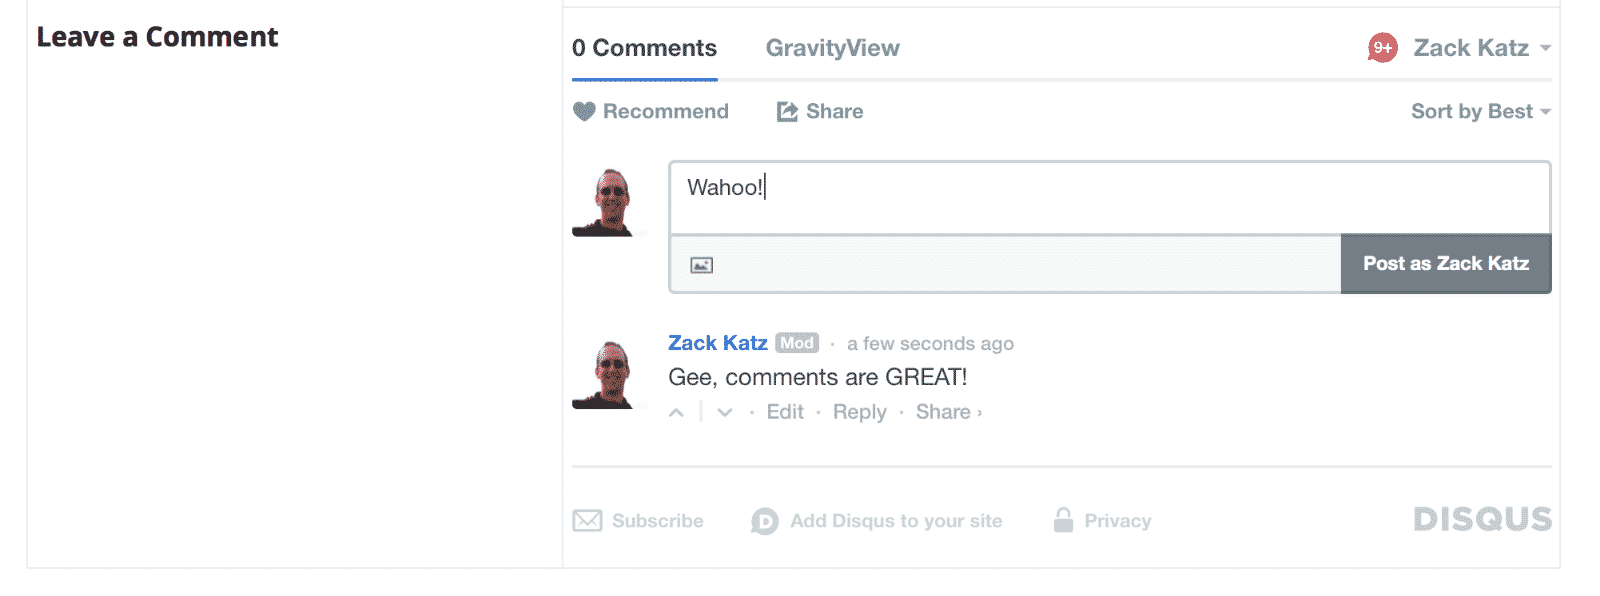 Screenshot of Disqus in action on the View